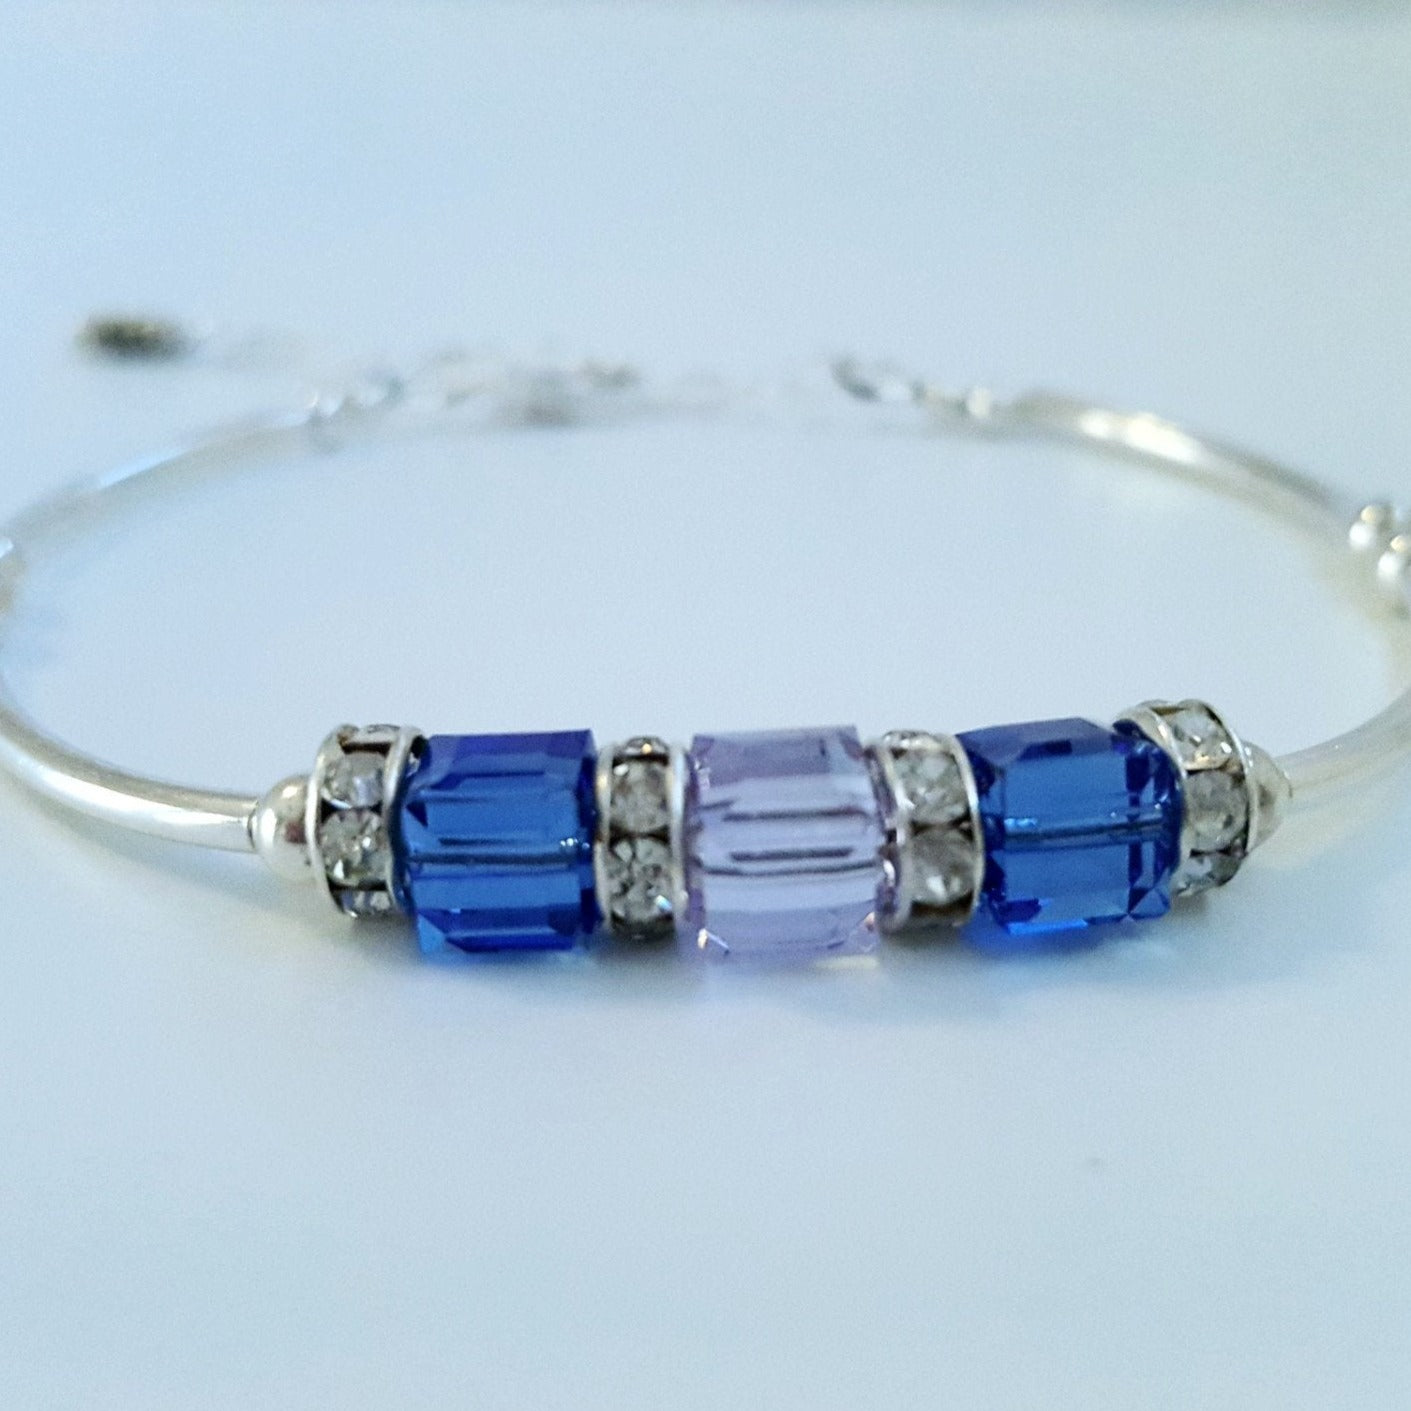 Personalized Birthstone Bracelet for Mothers and Grandmothers